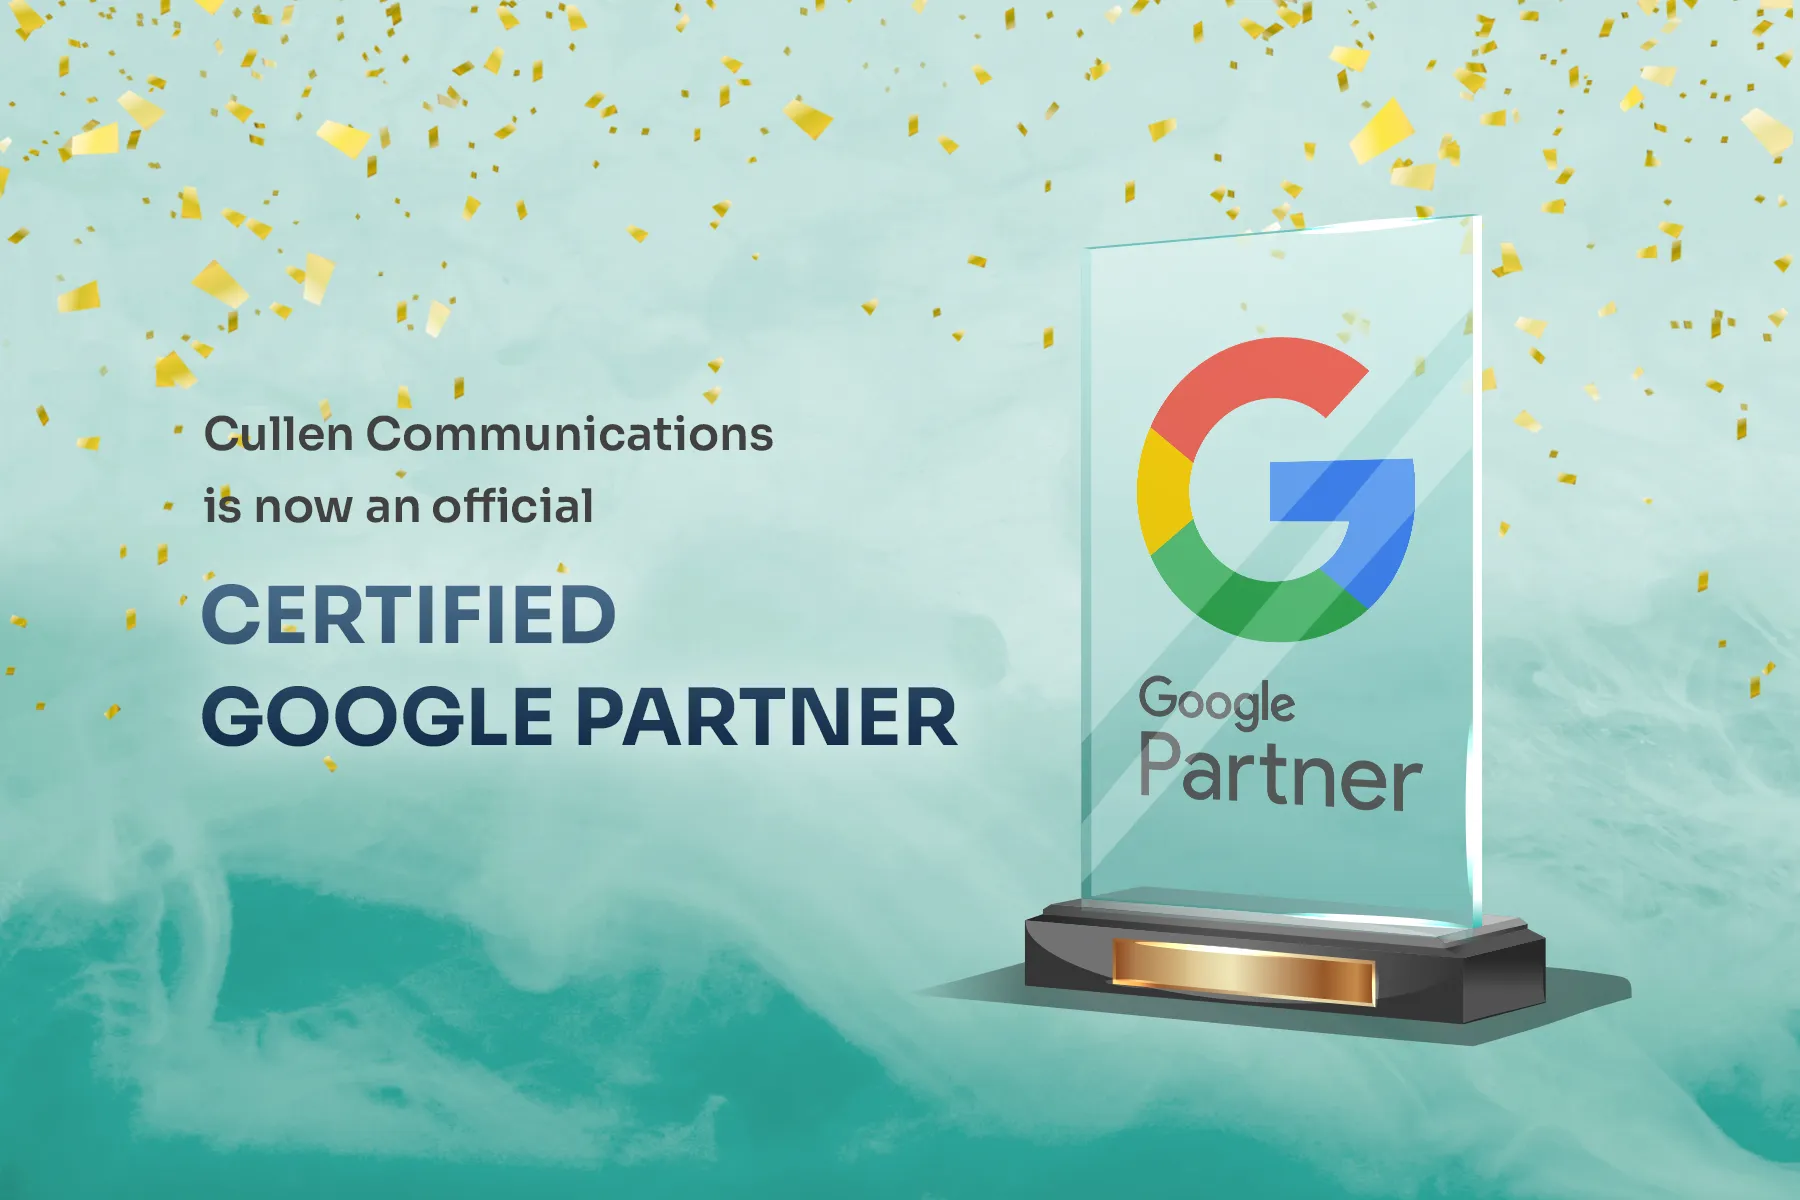 Cullen Communications is now an official Google Partner company